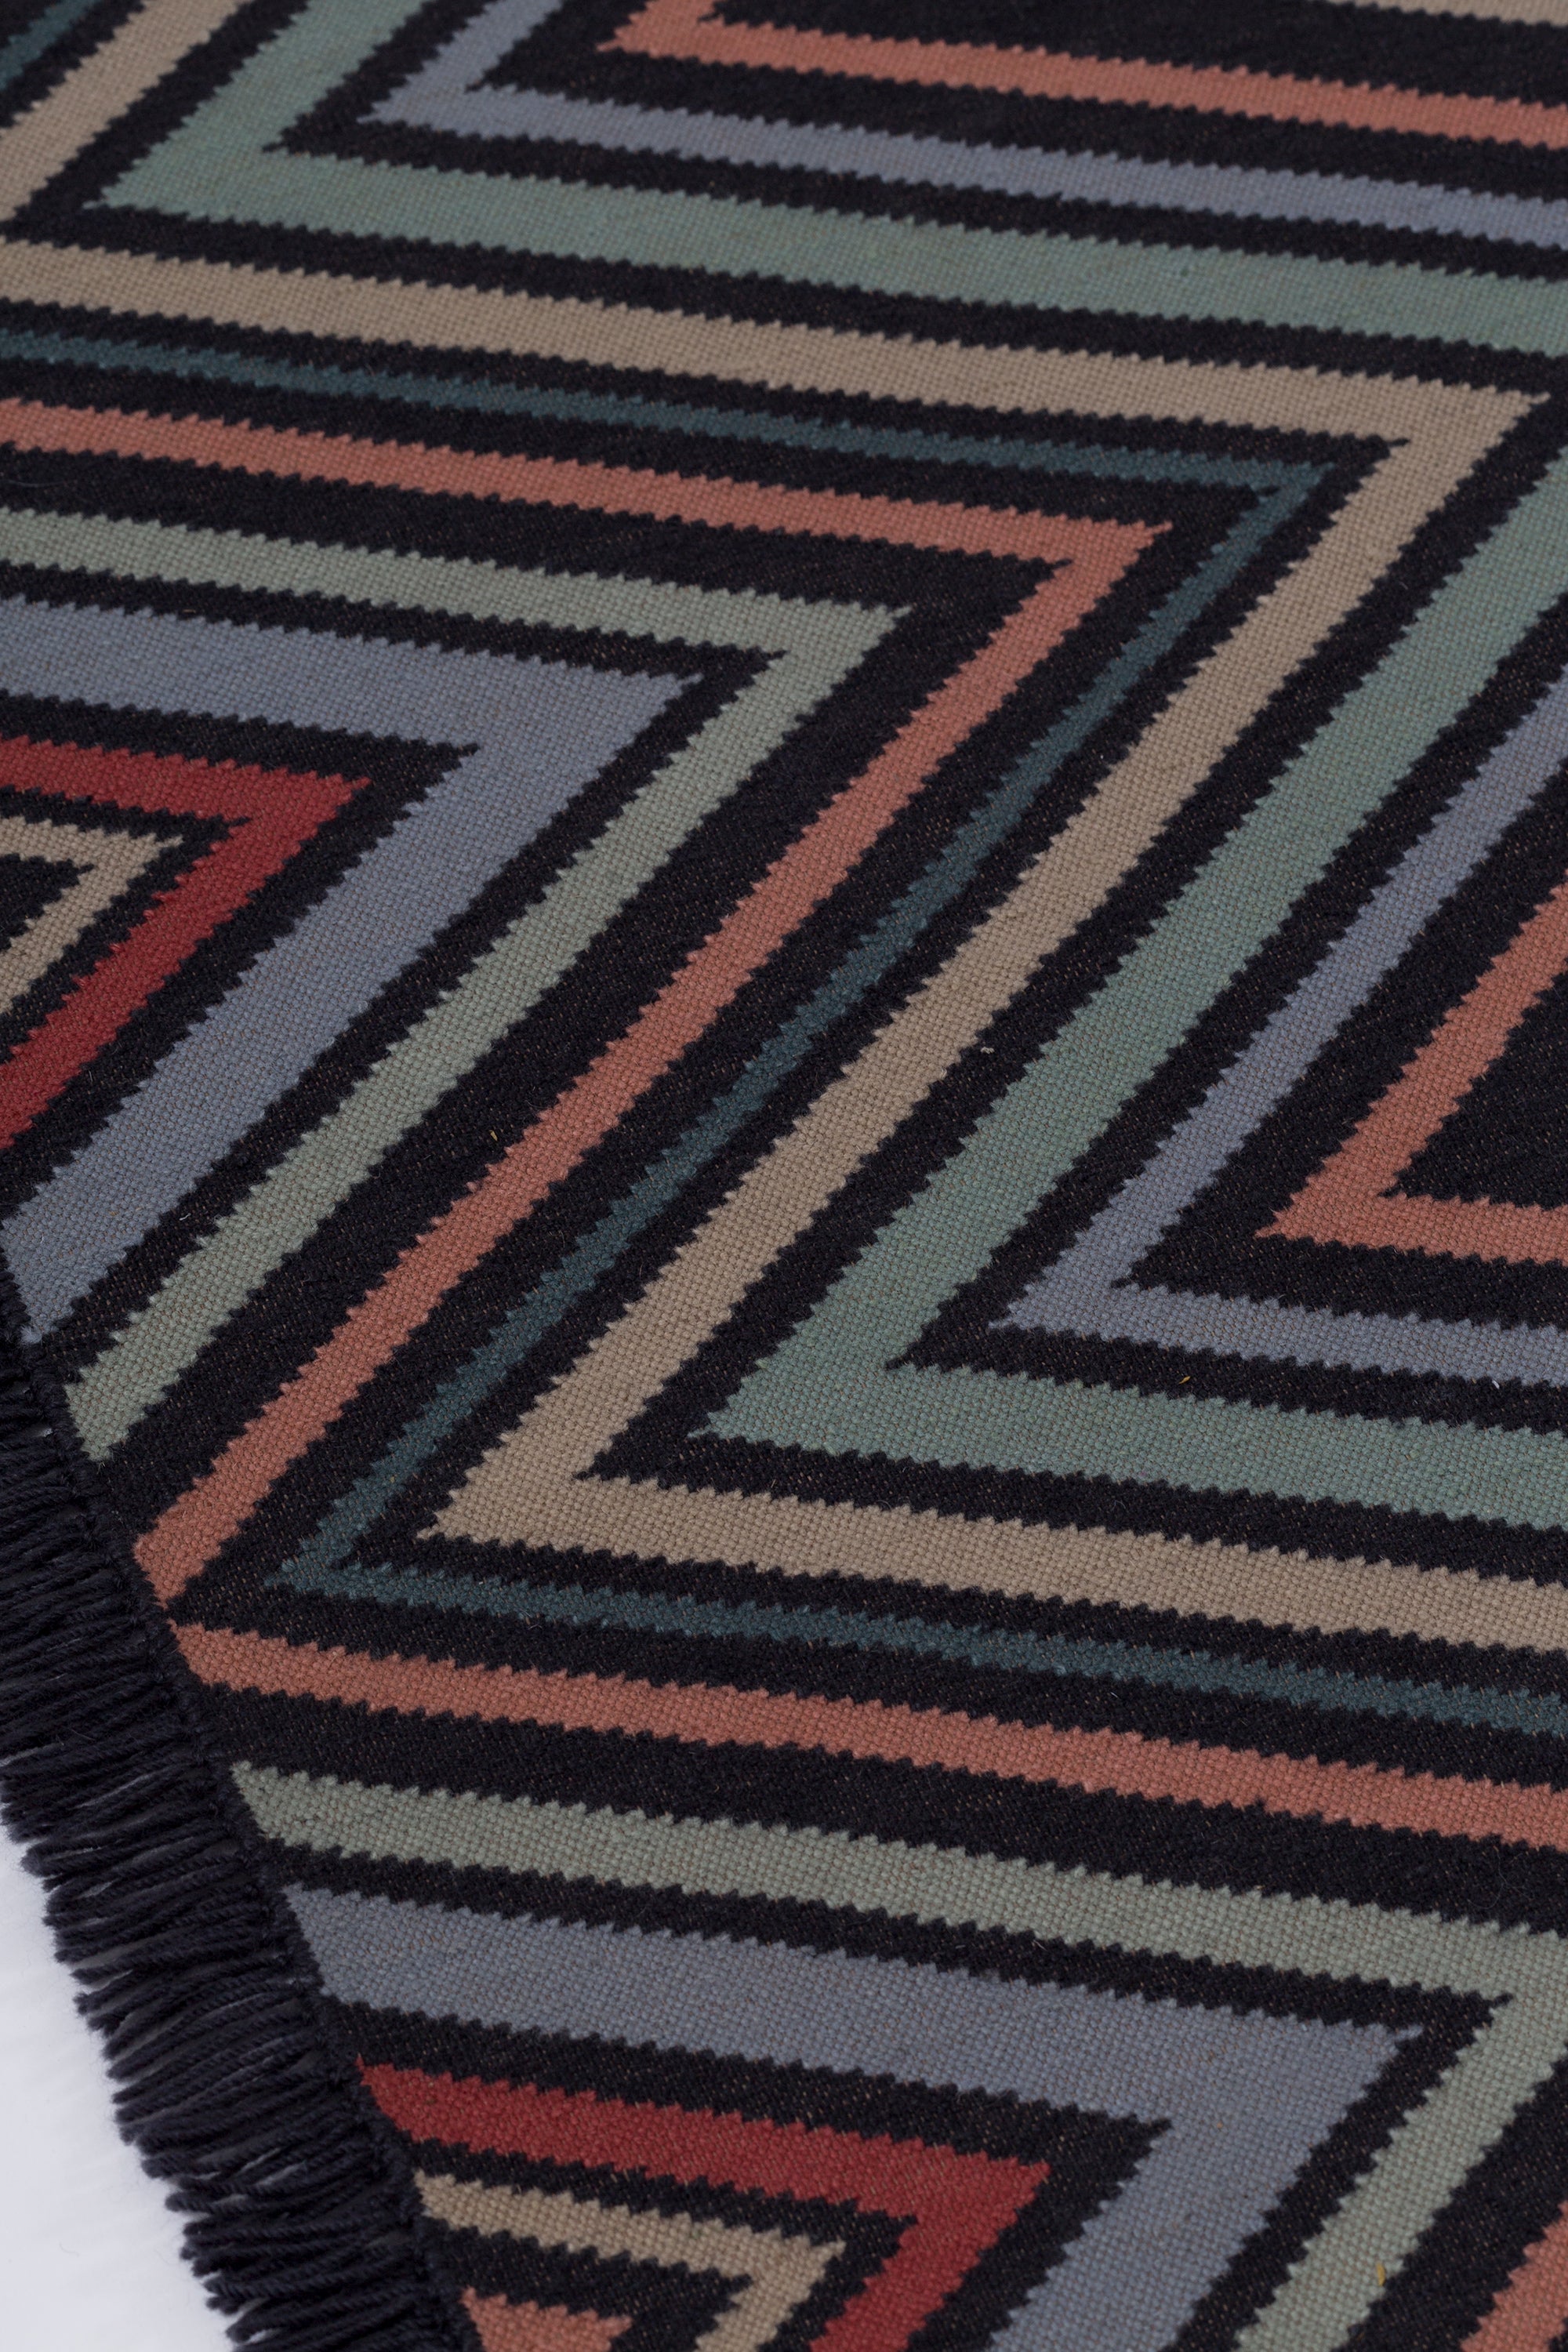 Detail of the To The Point Rug in Hessonite-Garnet-Slate, a zig zag pattern in red, blue coral with black, with a black fringed edge. 